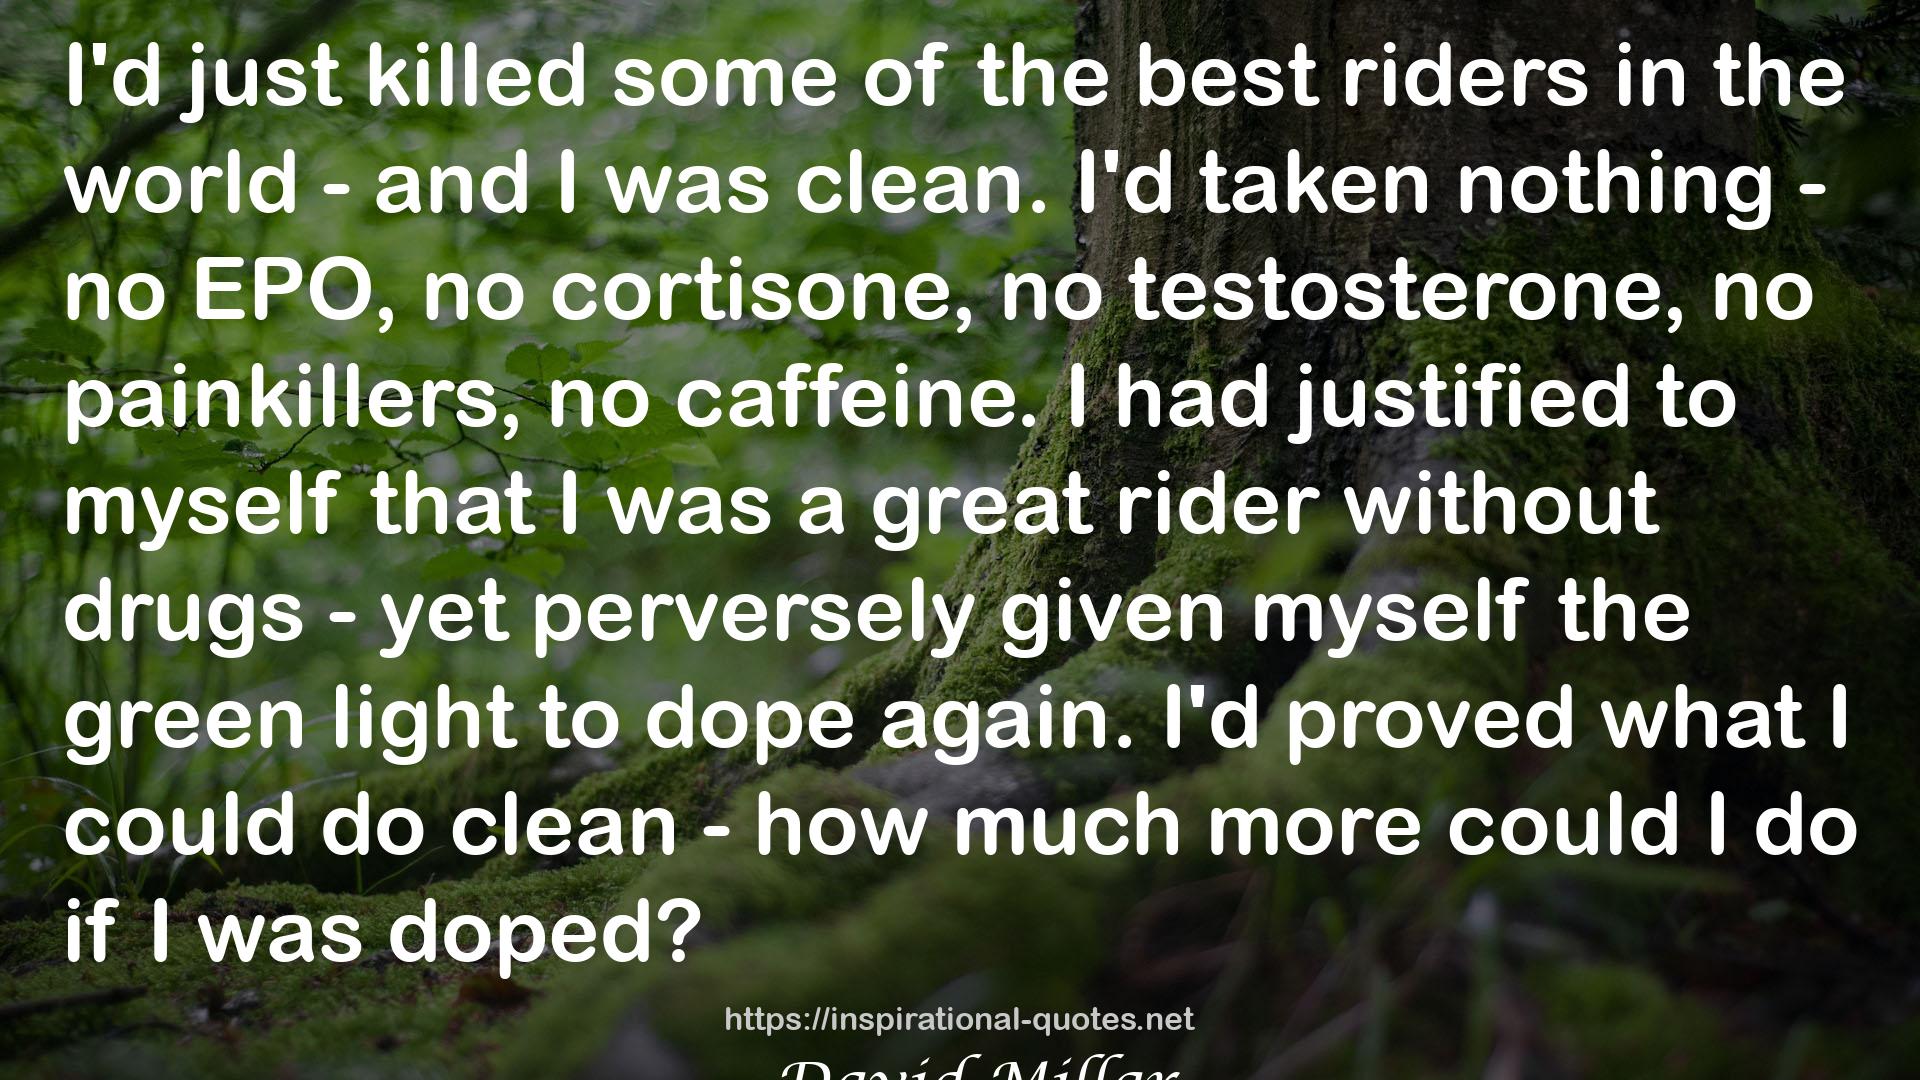 a great rider  QUOTES